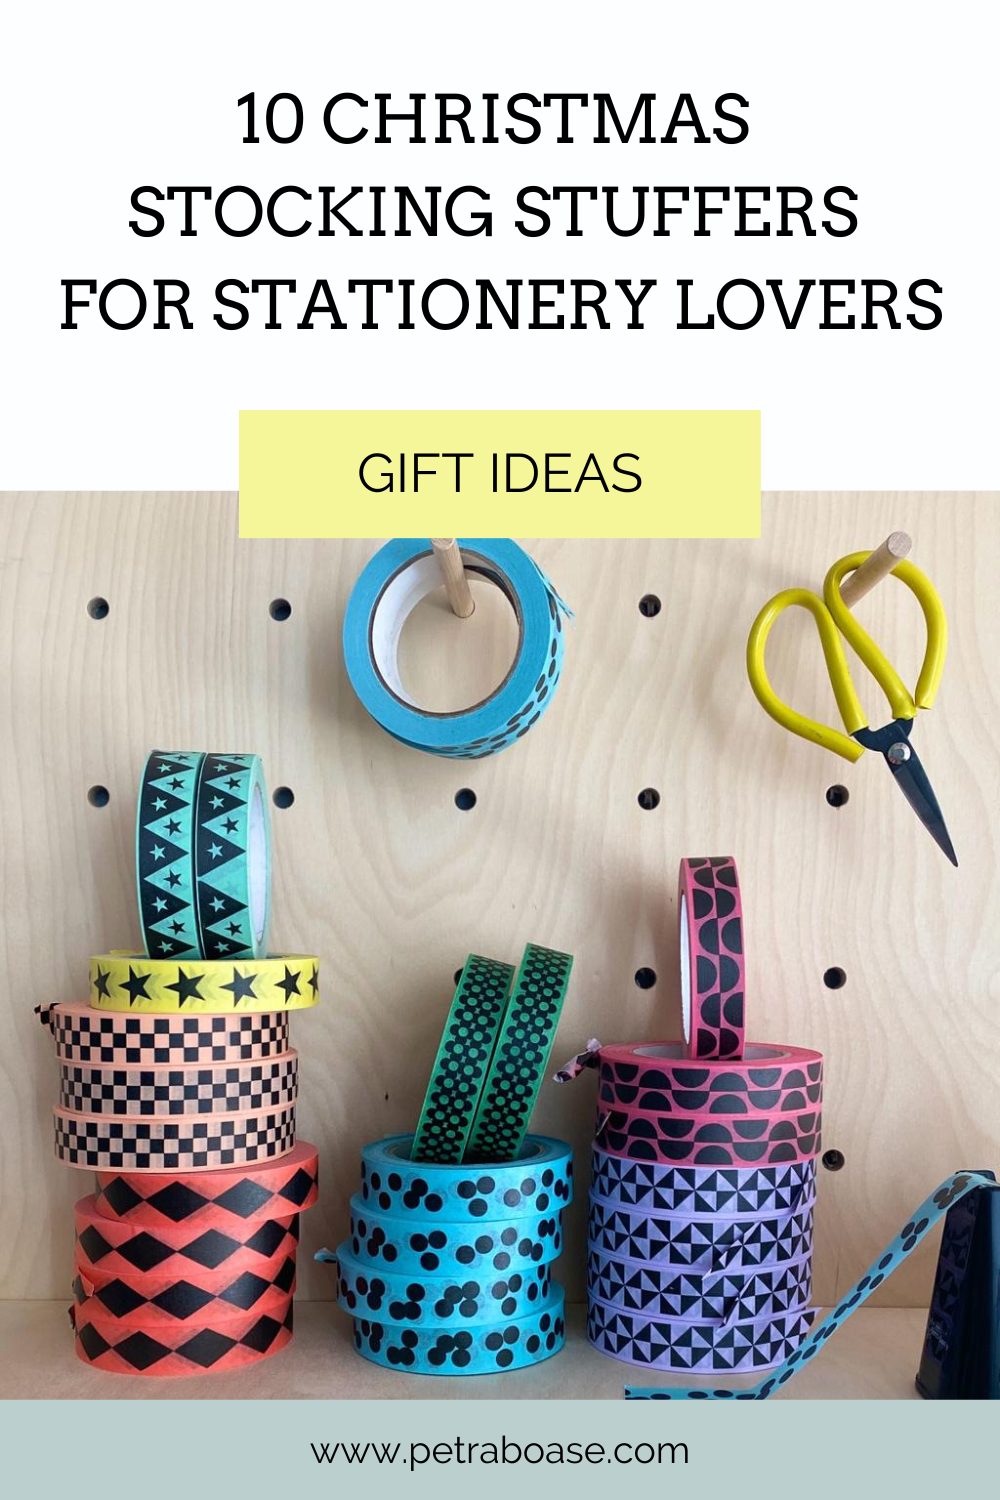 Christmas Stocking Stuffers For Stationery Lovers - Gift Ideas